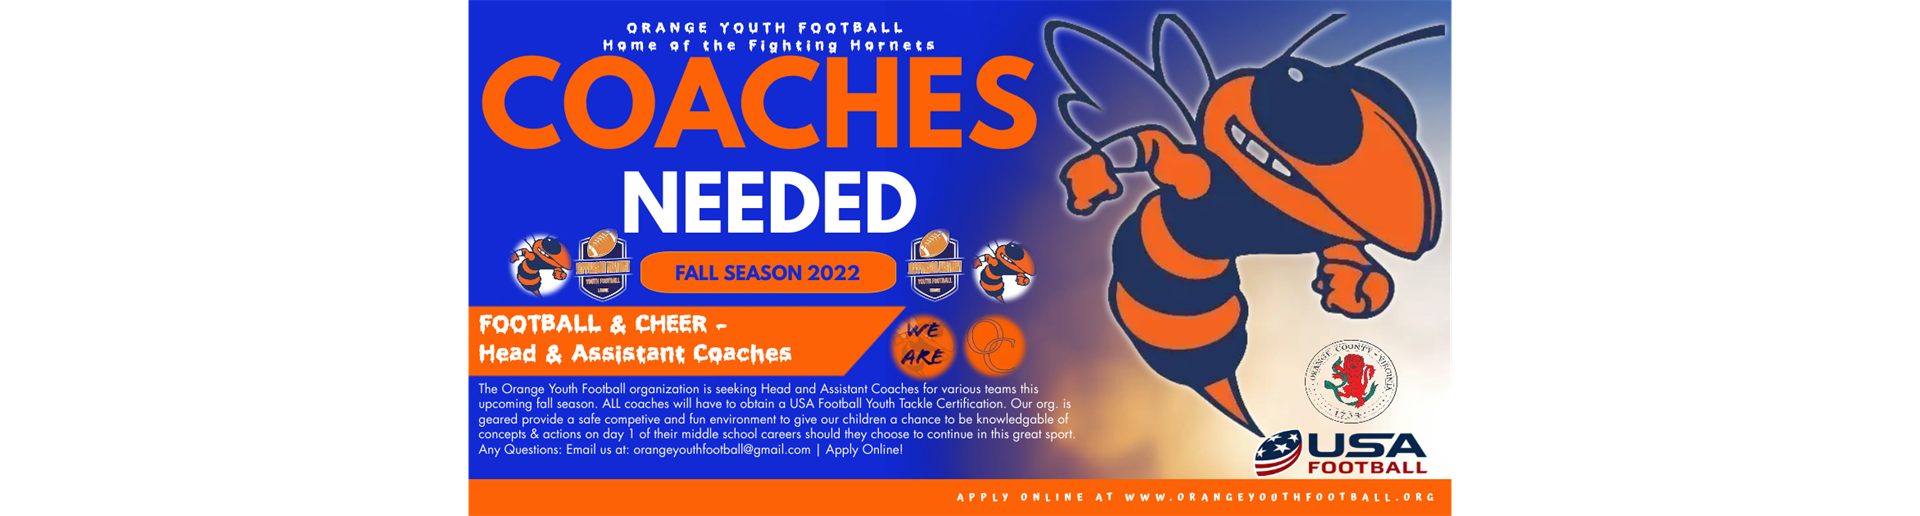 COACHES WANTED!